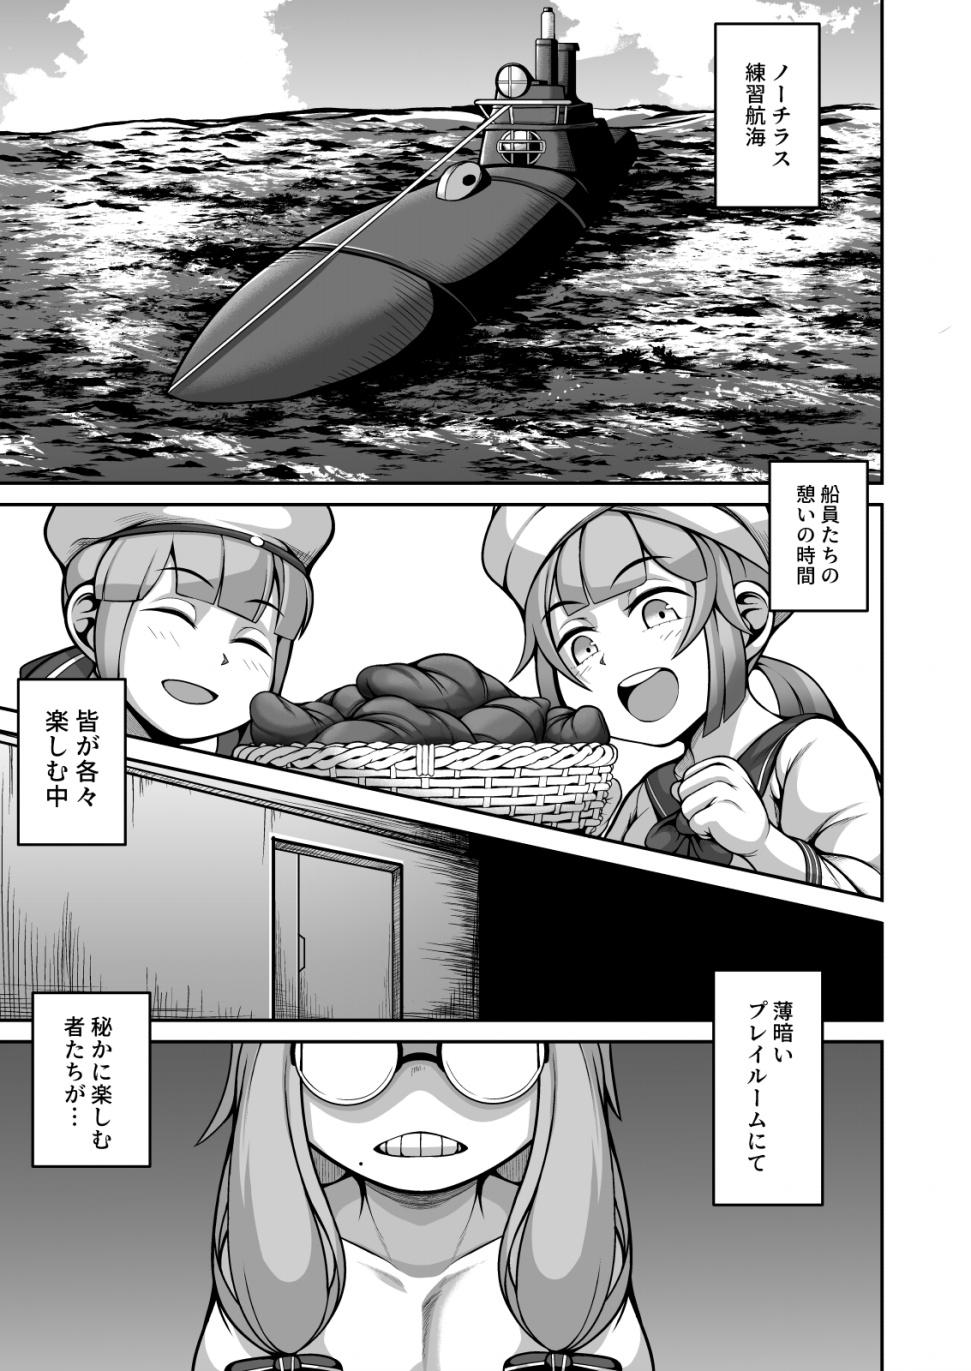 Novia 20,000 miles under the shit - Fate grand order Blonde - Page 5